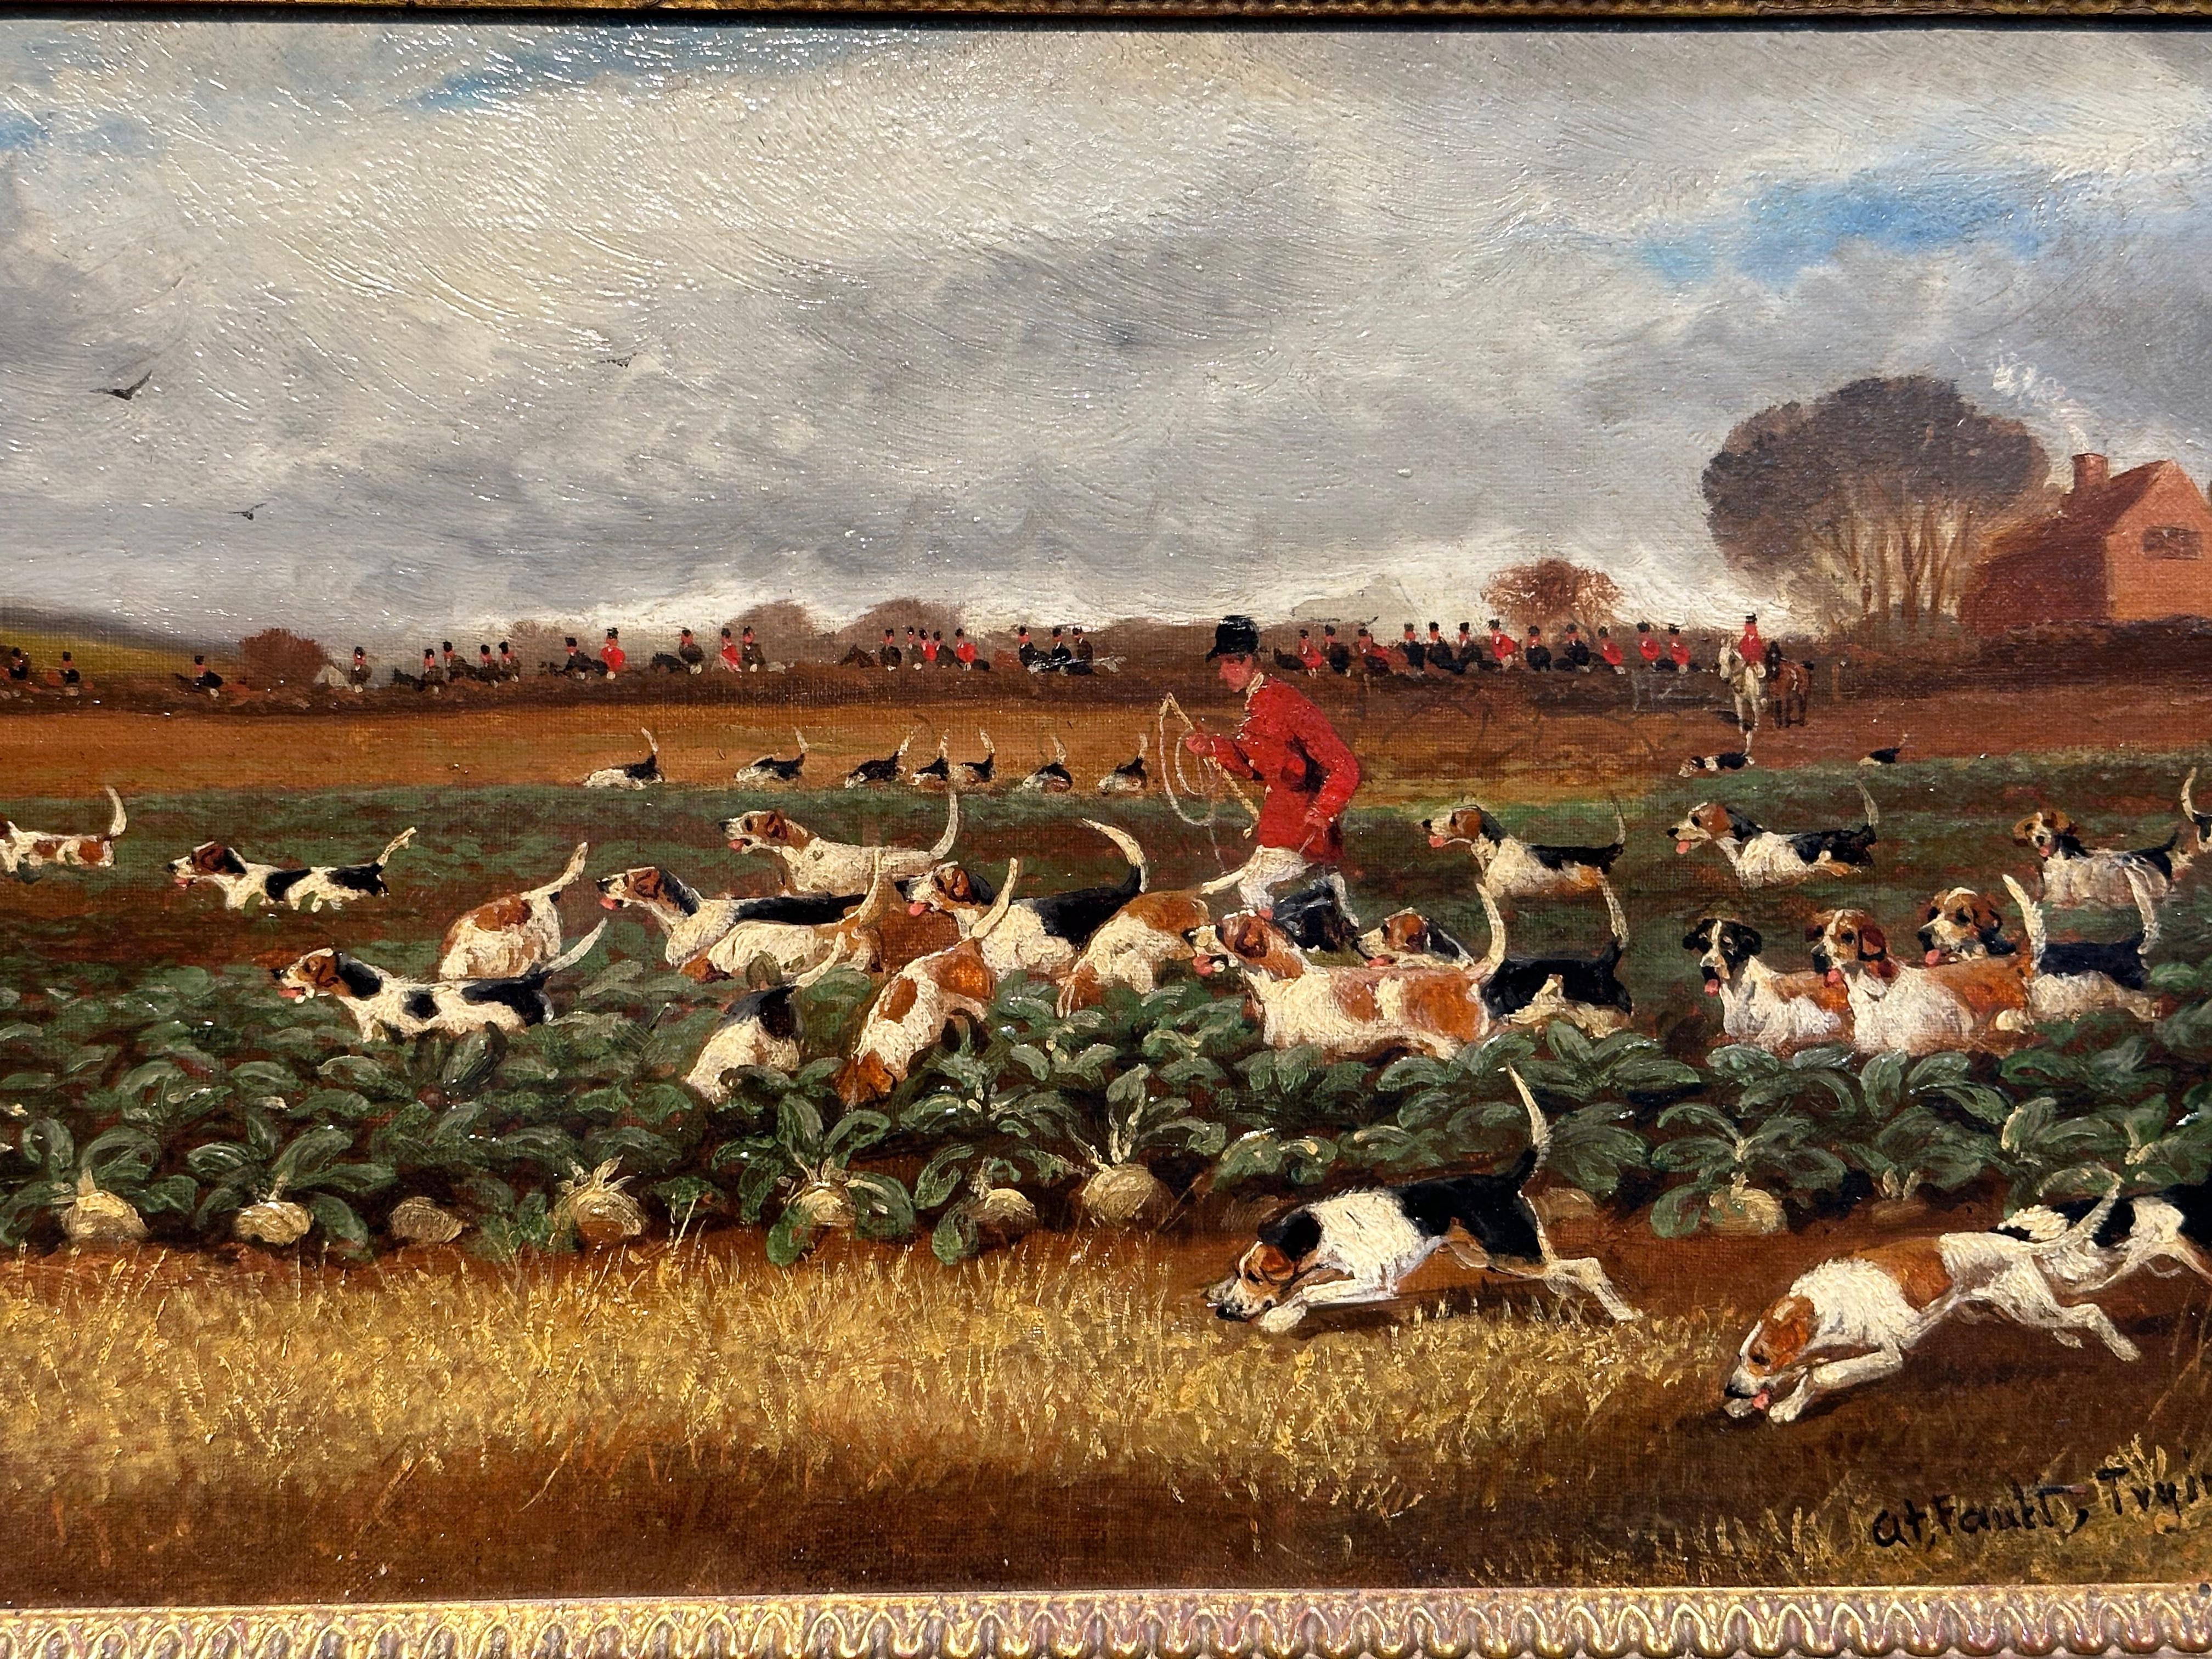 19th century English Fox hunters with hounds in a turnip patch landscape. - Painting by Sylvester Martin